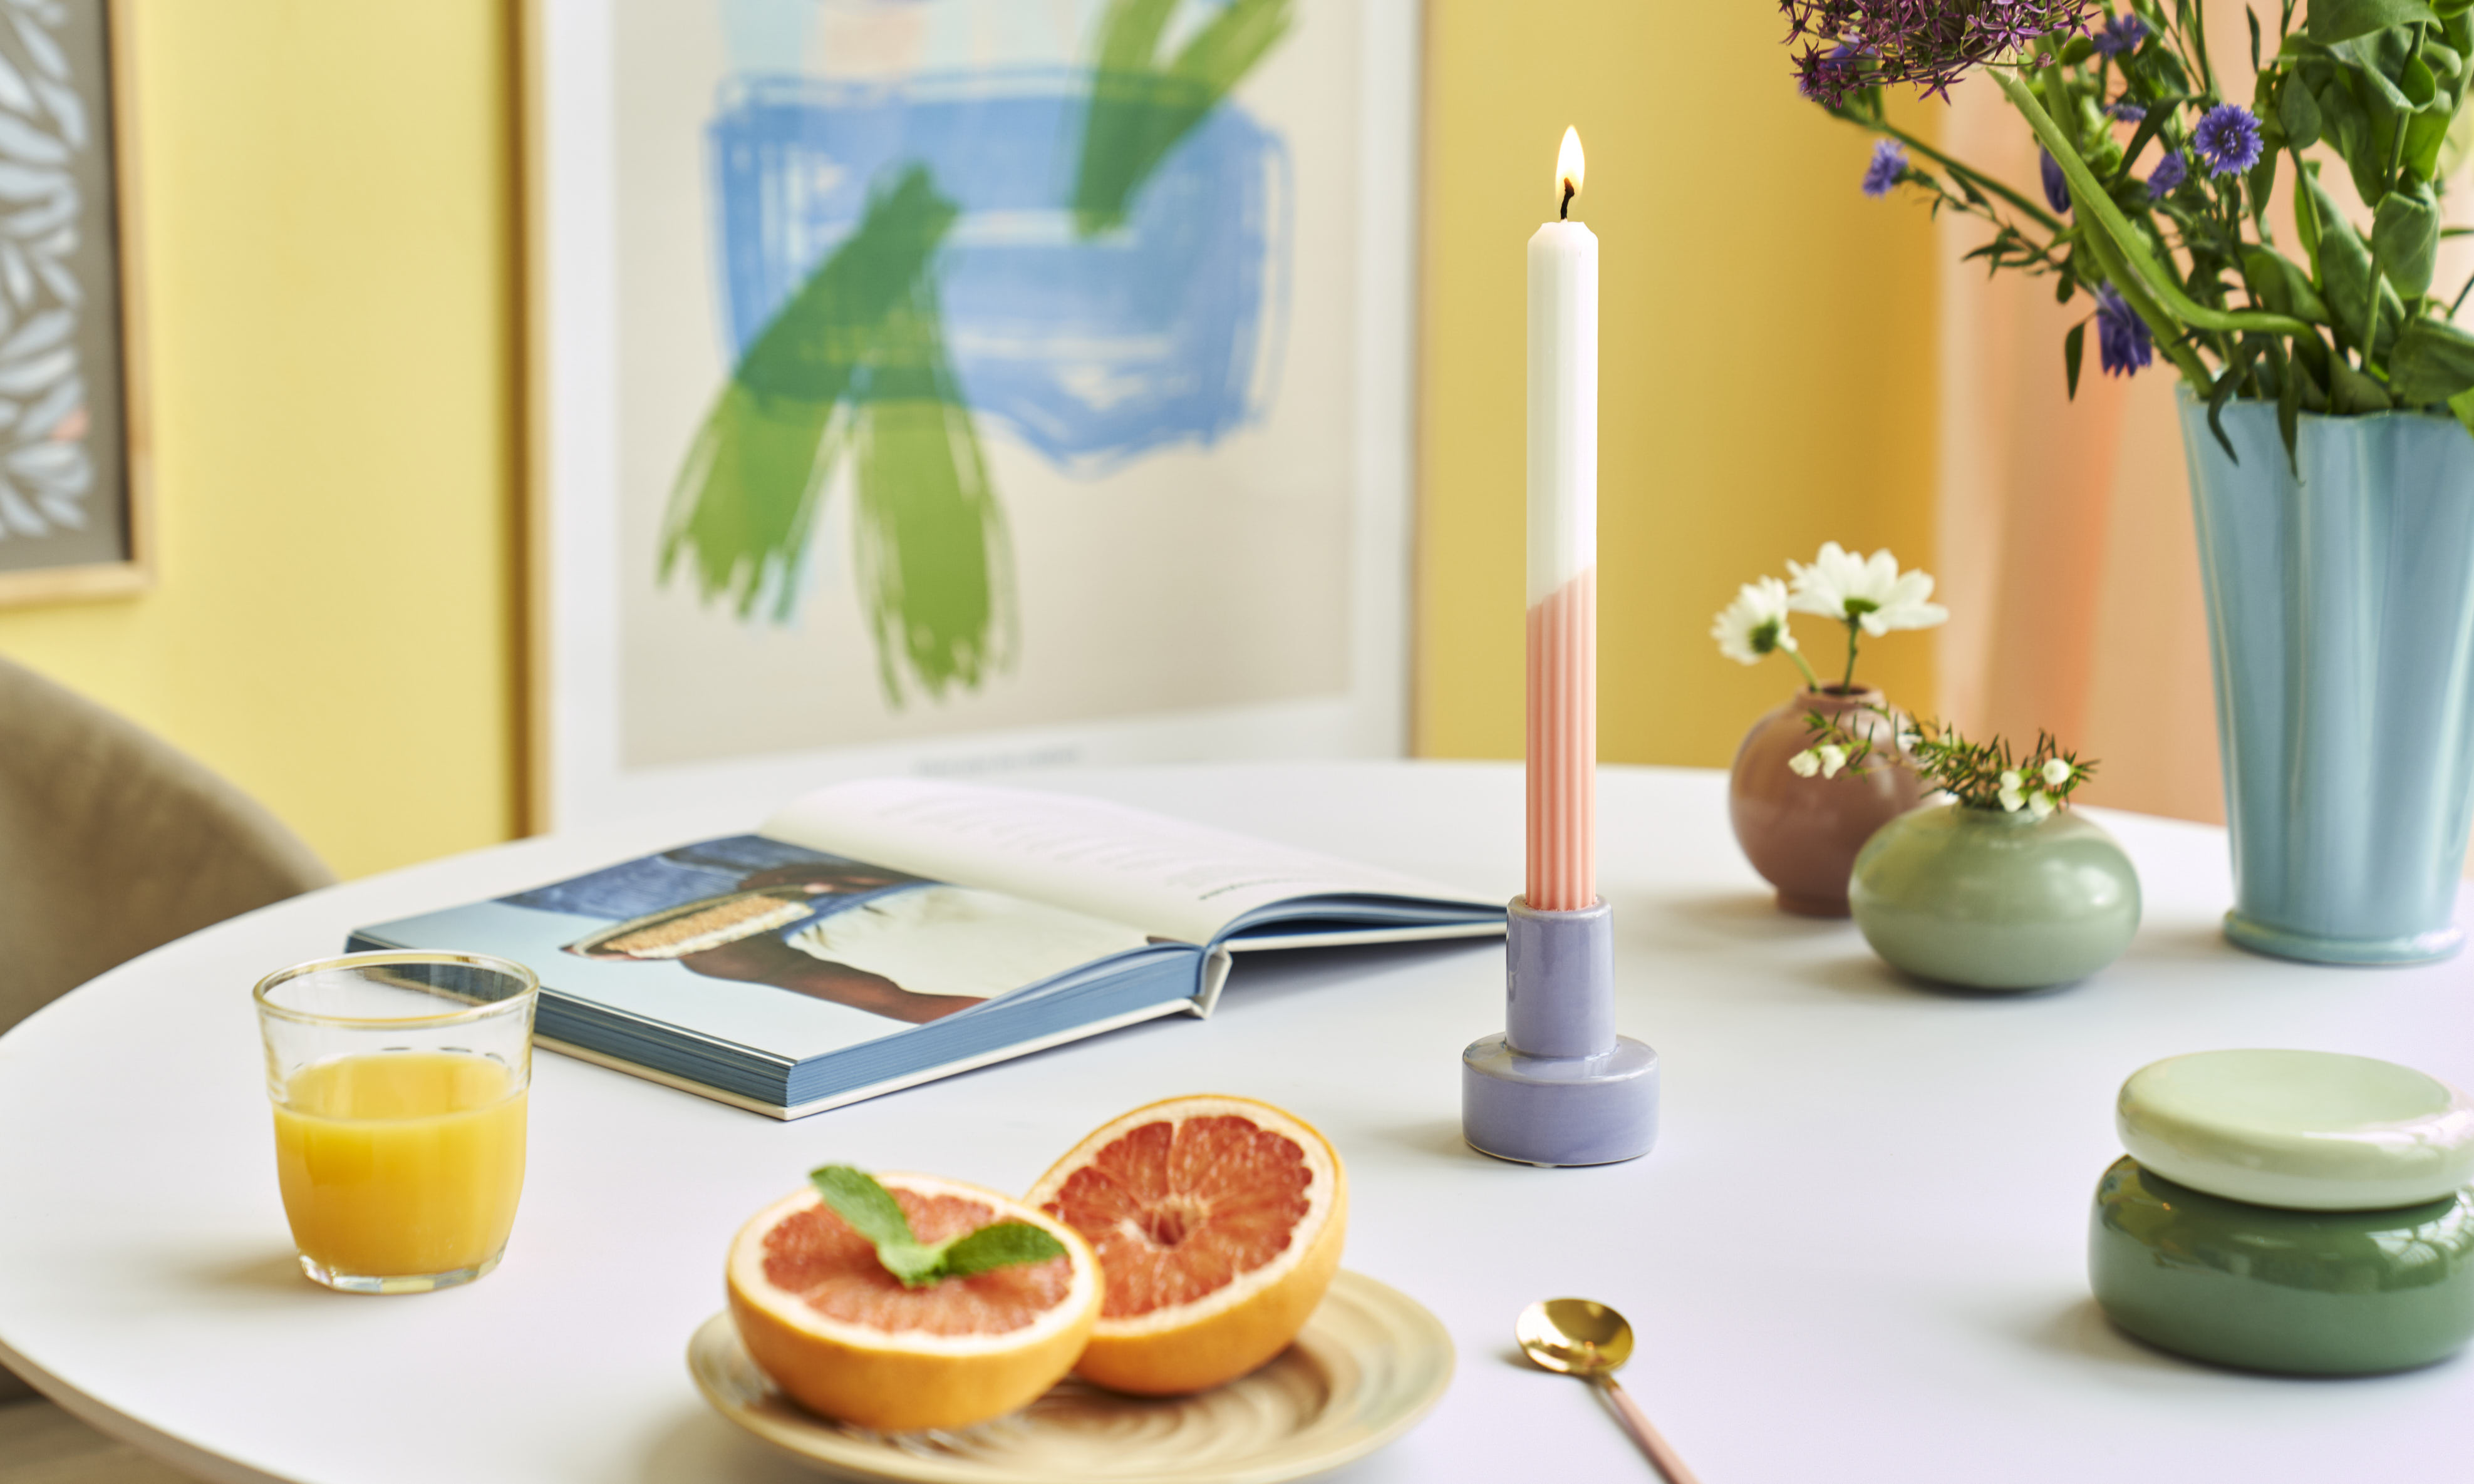 BRIGHTEN UP THE HOME WITH SØSTRENE GRENE’S NEWEST COLOURFUL LIVING COLLECTION